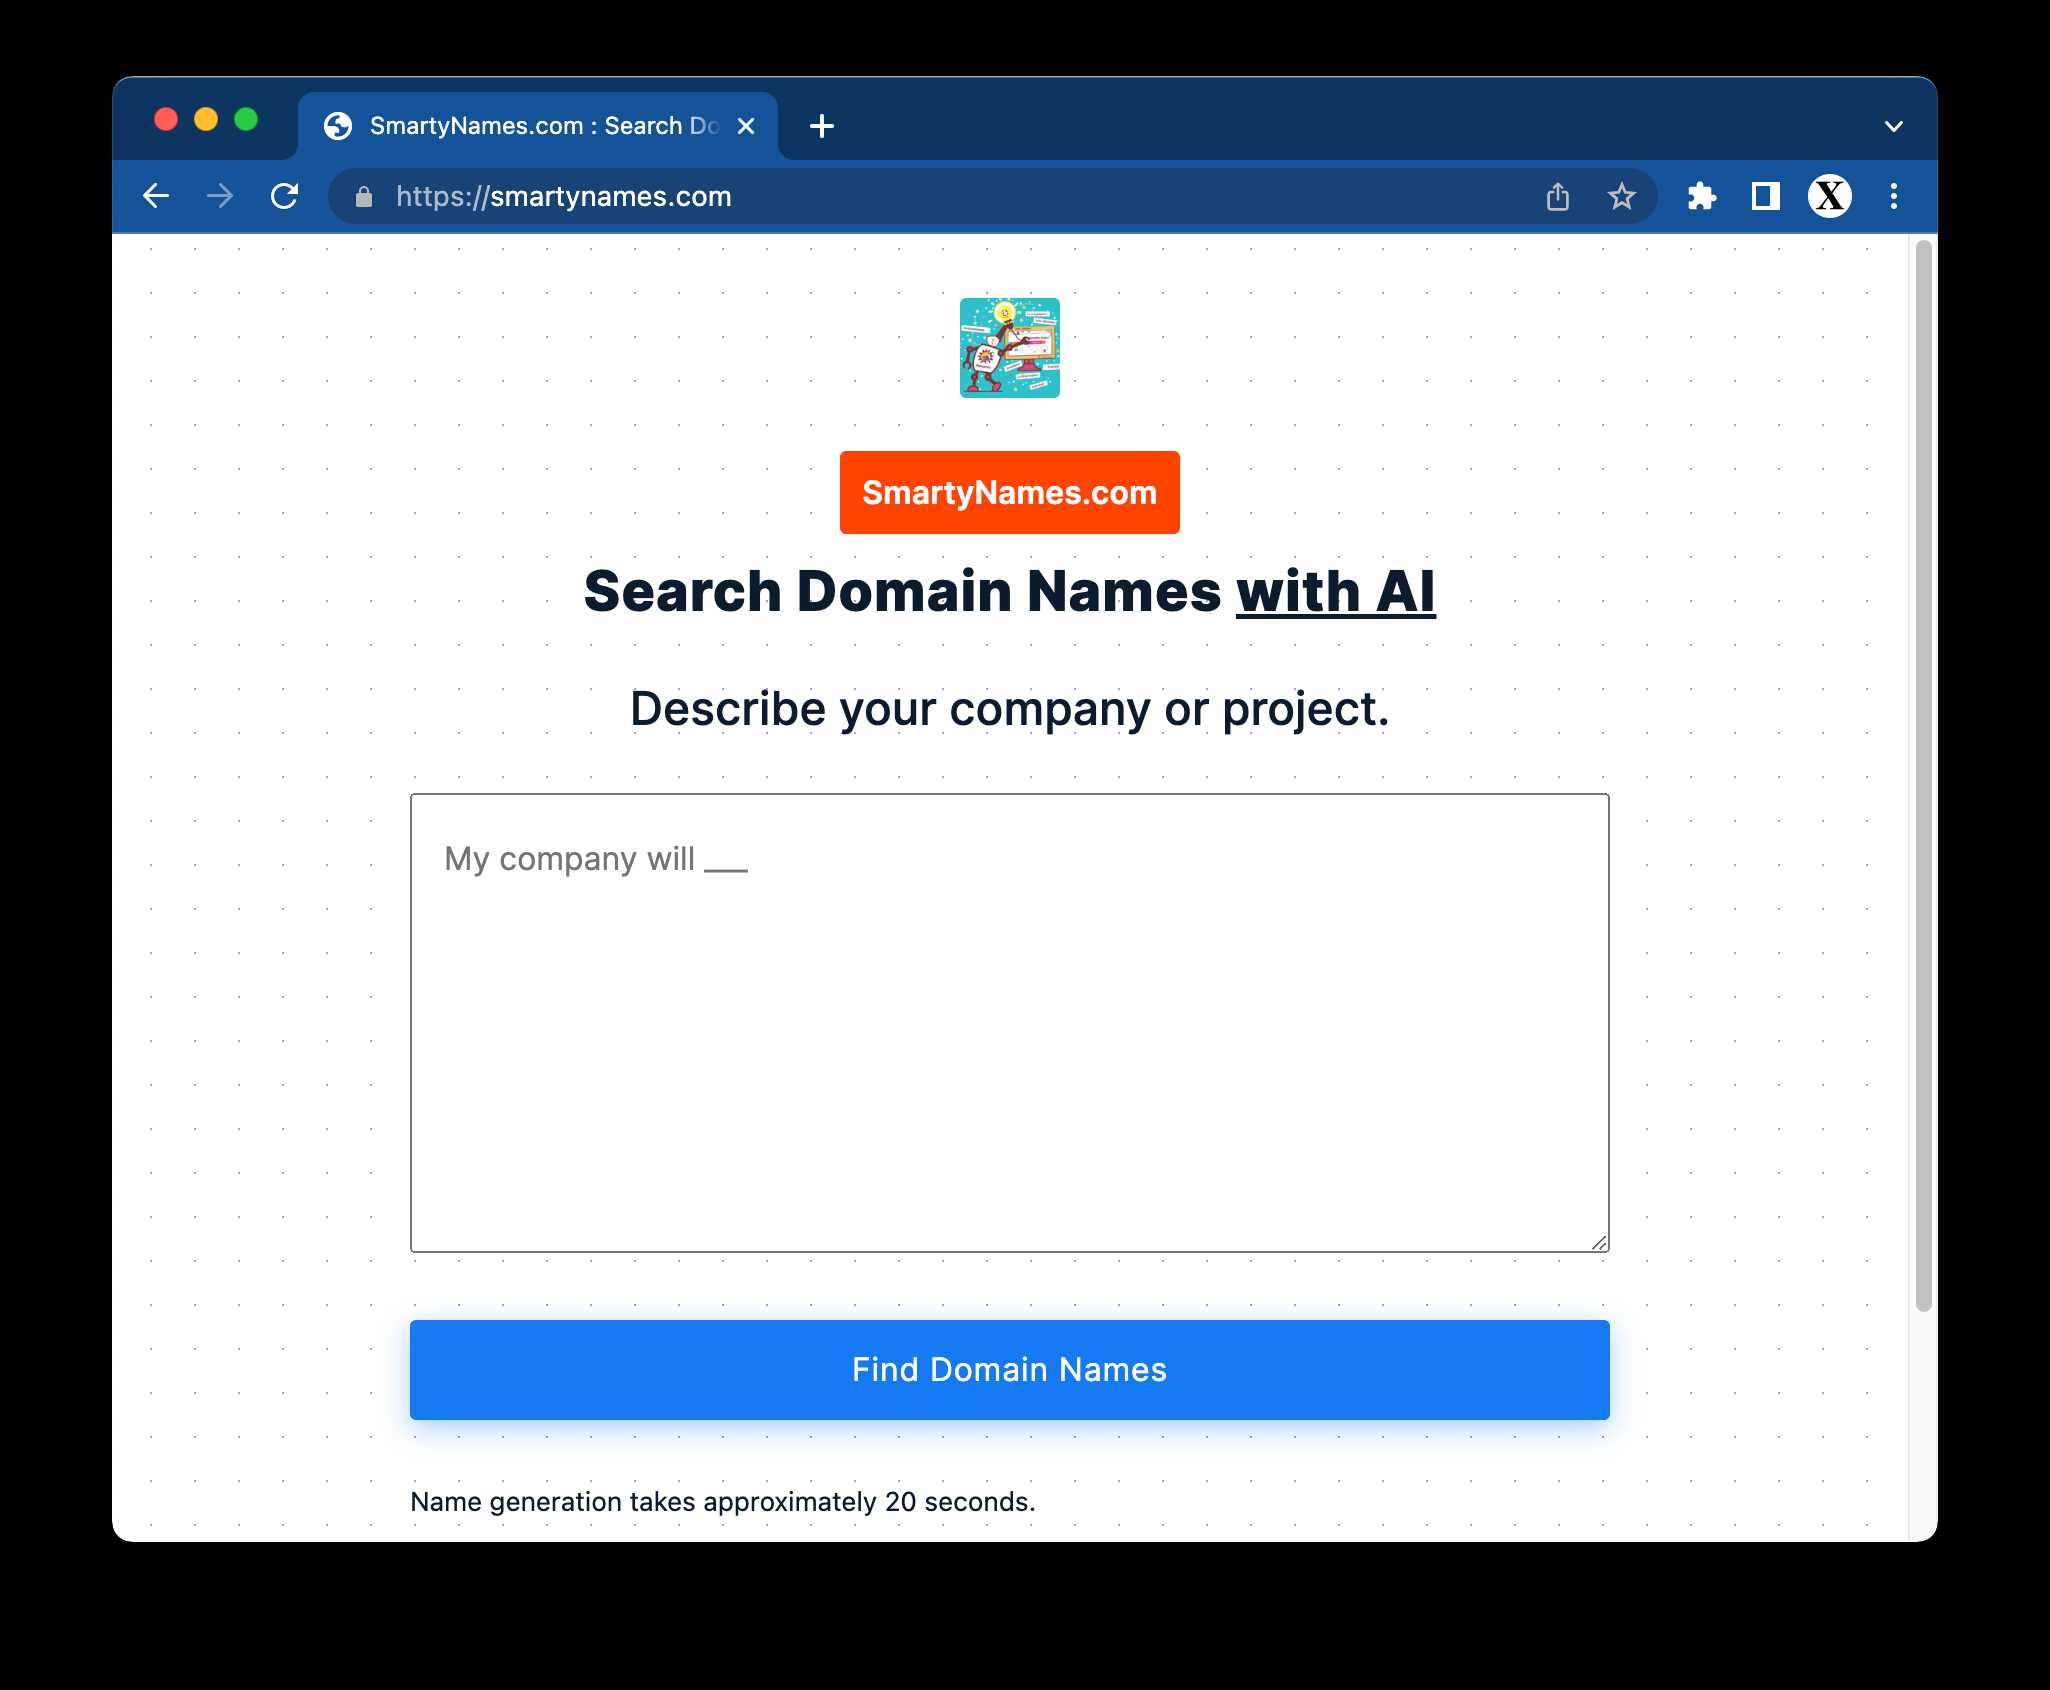 SmartyNames.com : Search Domain Names with Artificial Intelligence